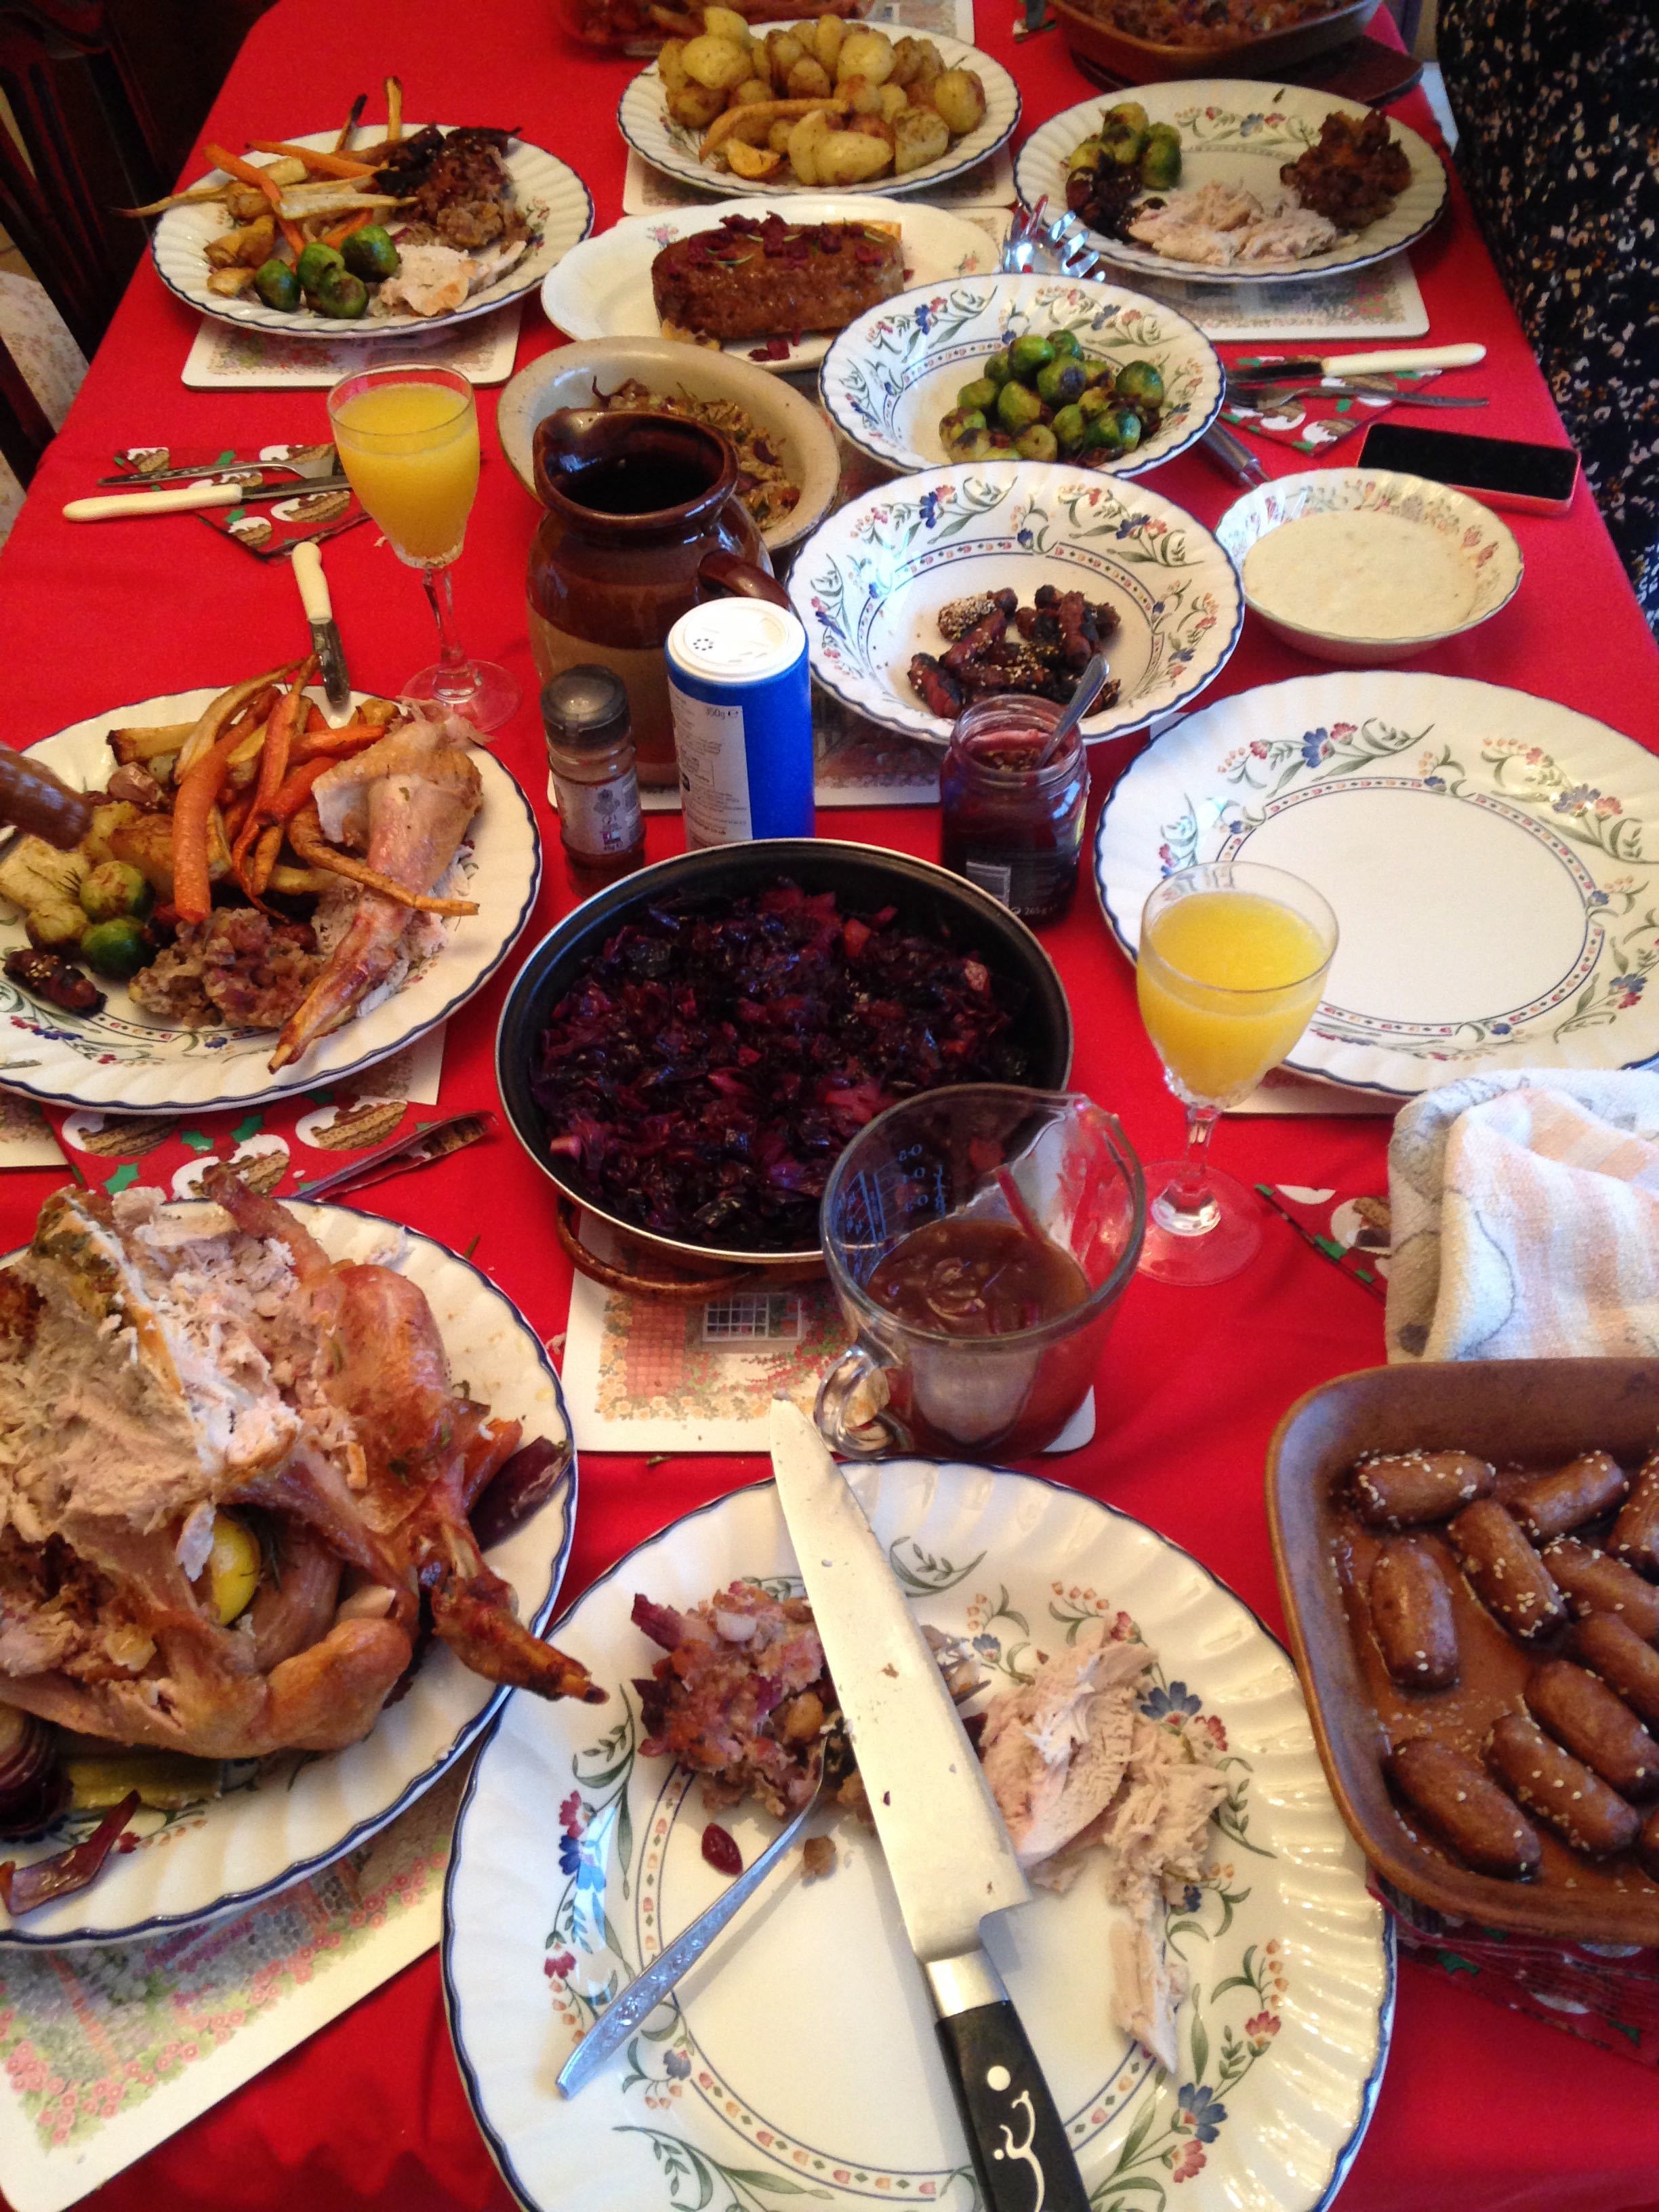 Authentic British Christmas Dinner : The traditional Christmas dinners from around the WORLD ...